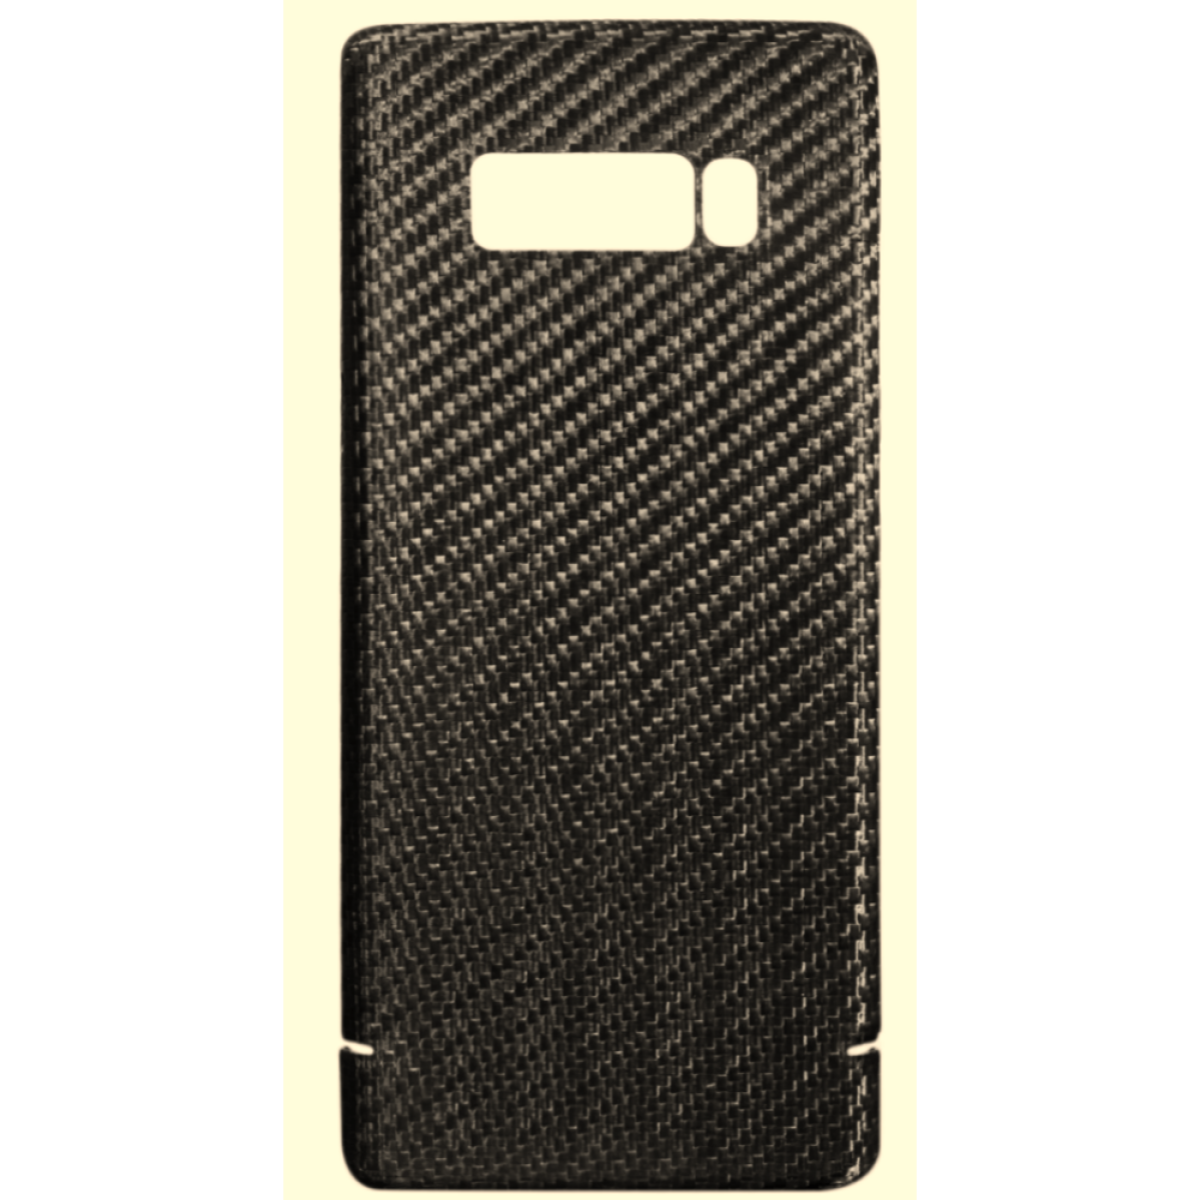 Viversis Carbon Cover Note 8, Full Not available Universal, Universal, Cover